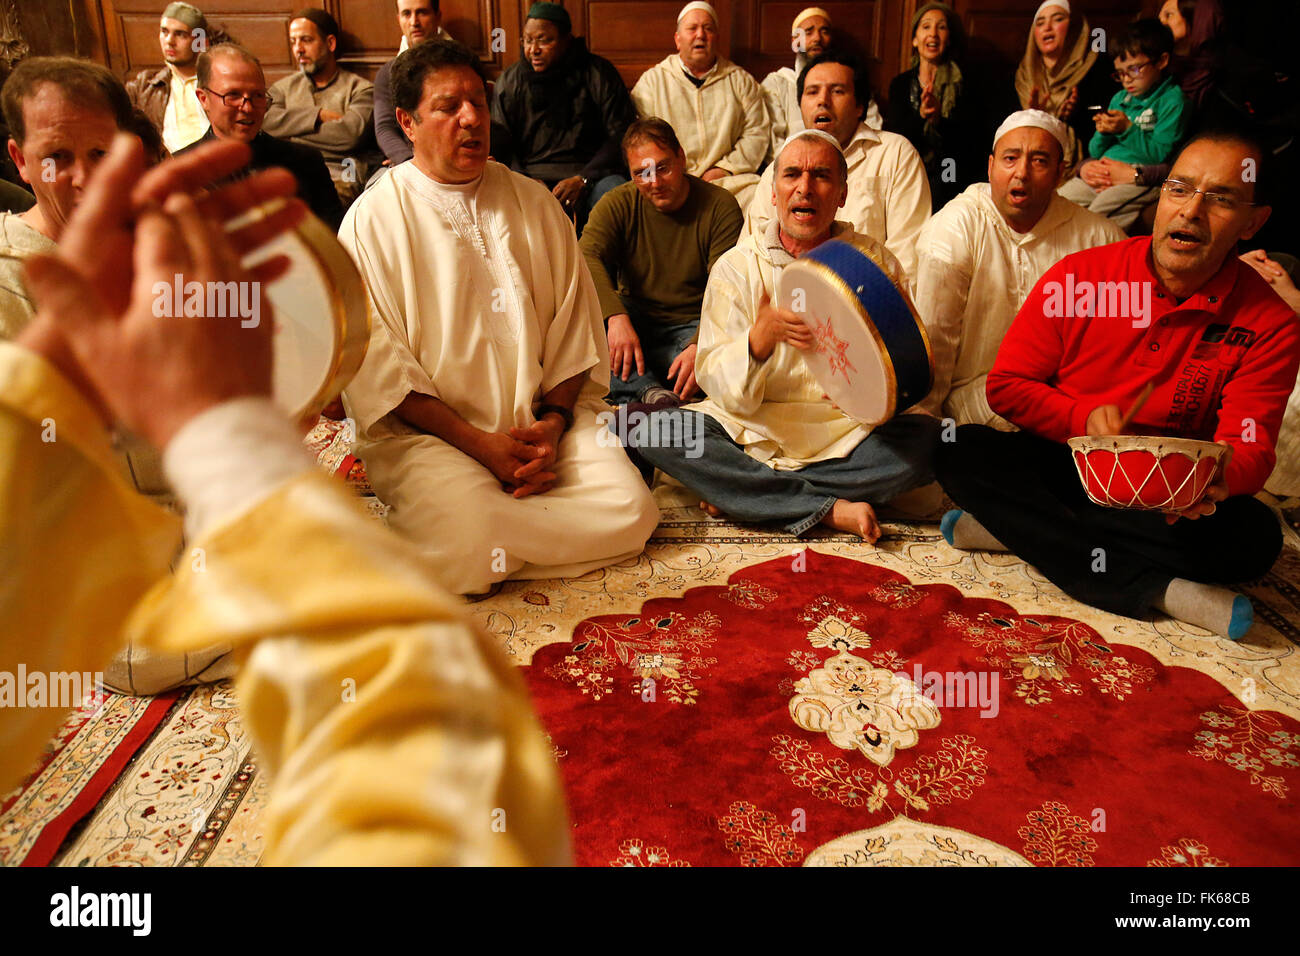 Alawi Sufi Muslims singing and playing drums, Nandy, Seine-et-Marne, France, Europe Stock Photo